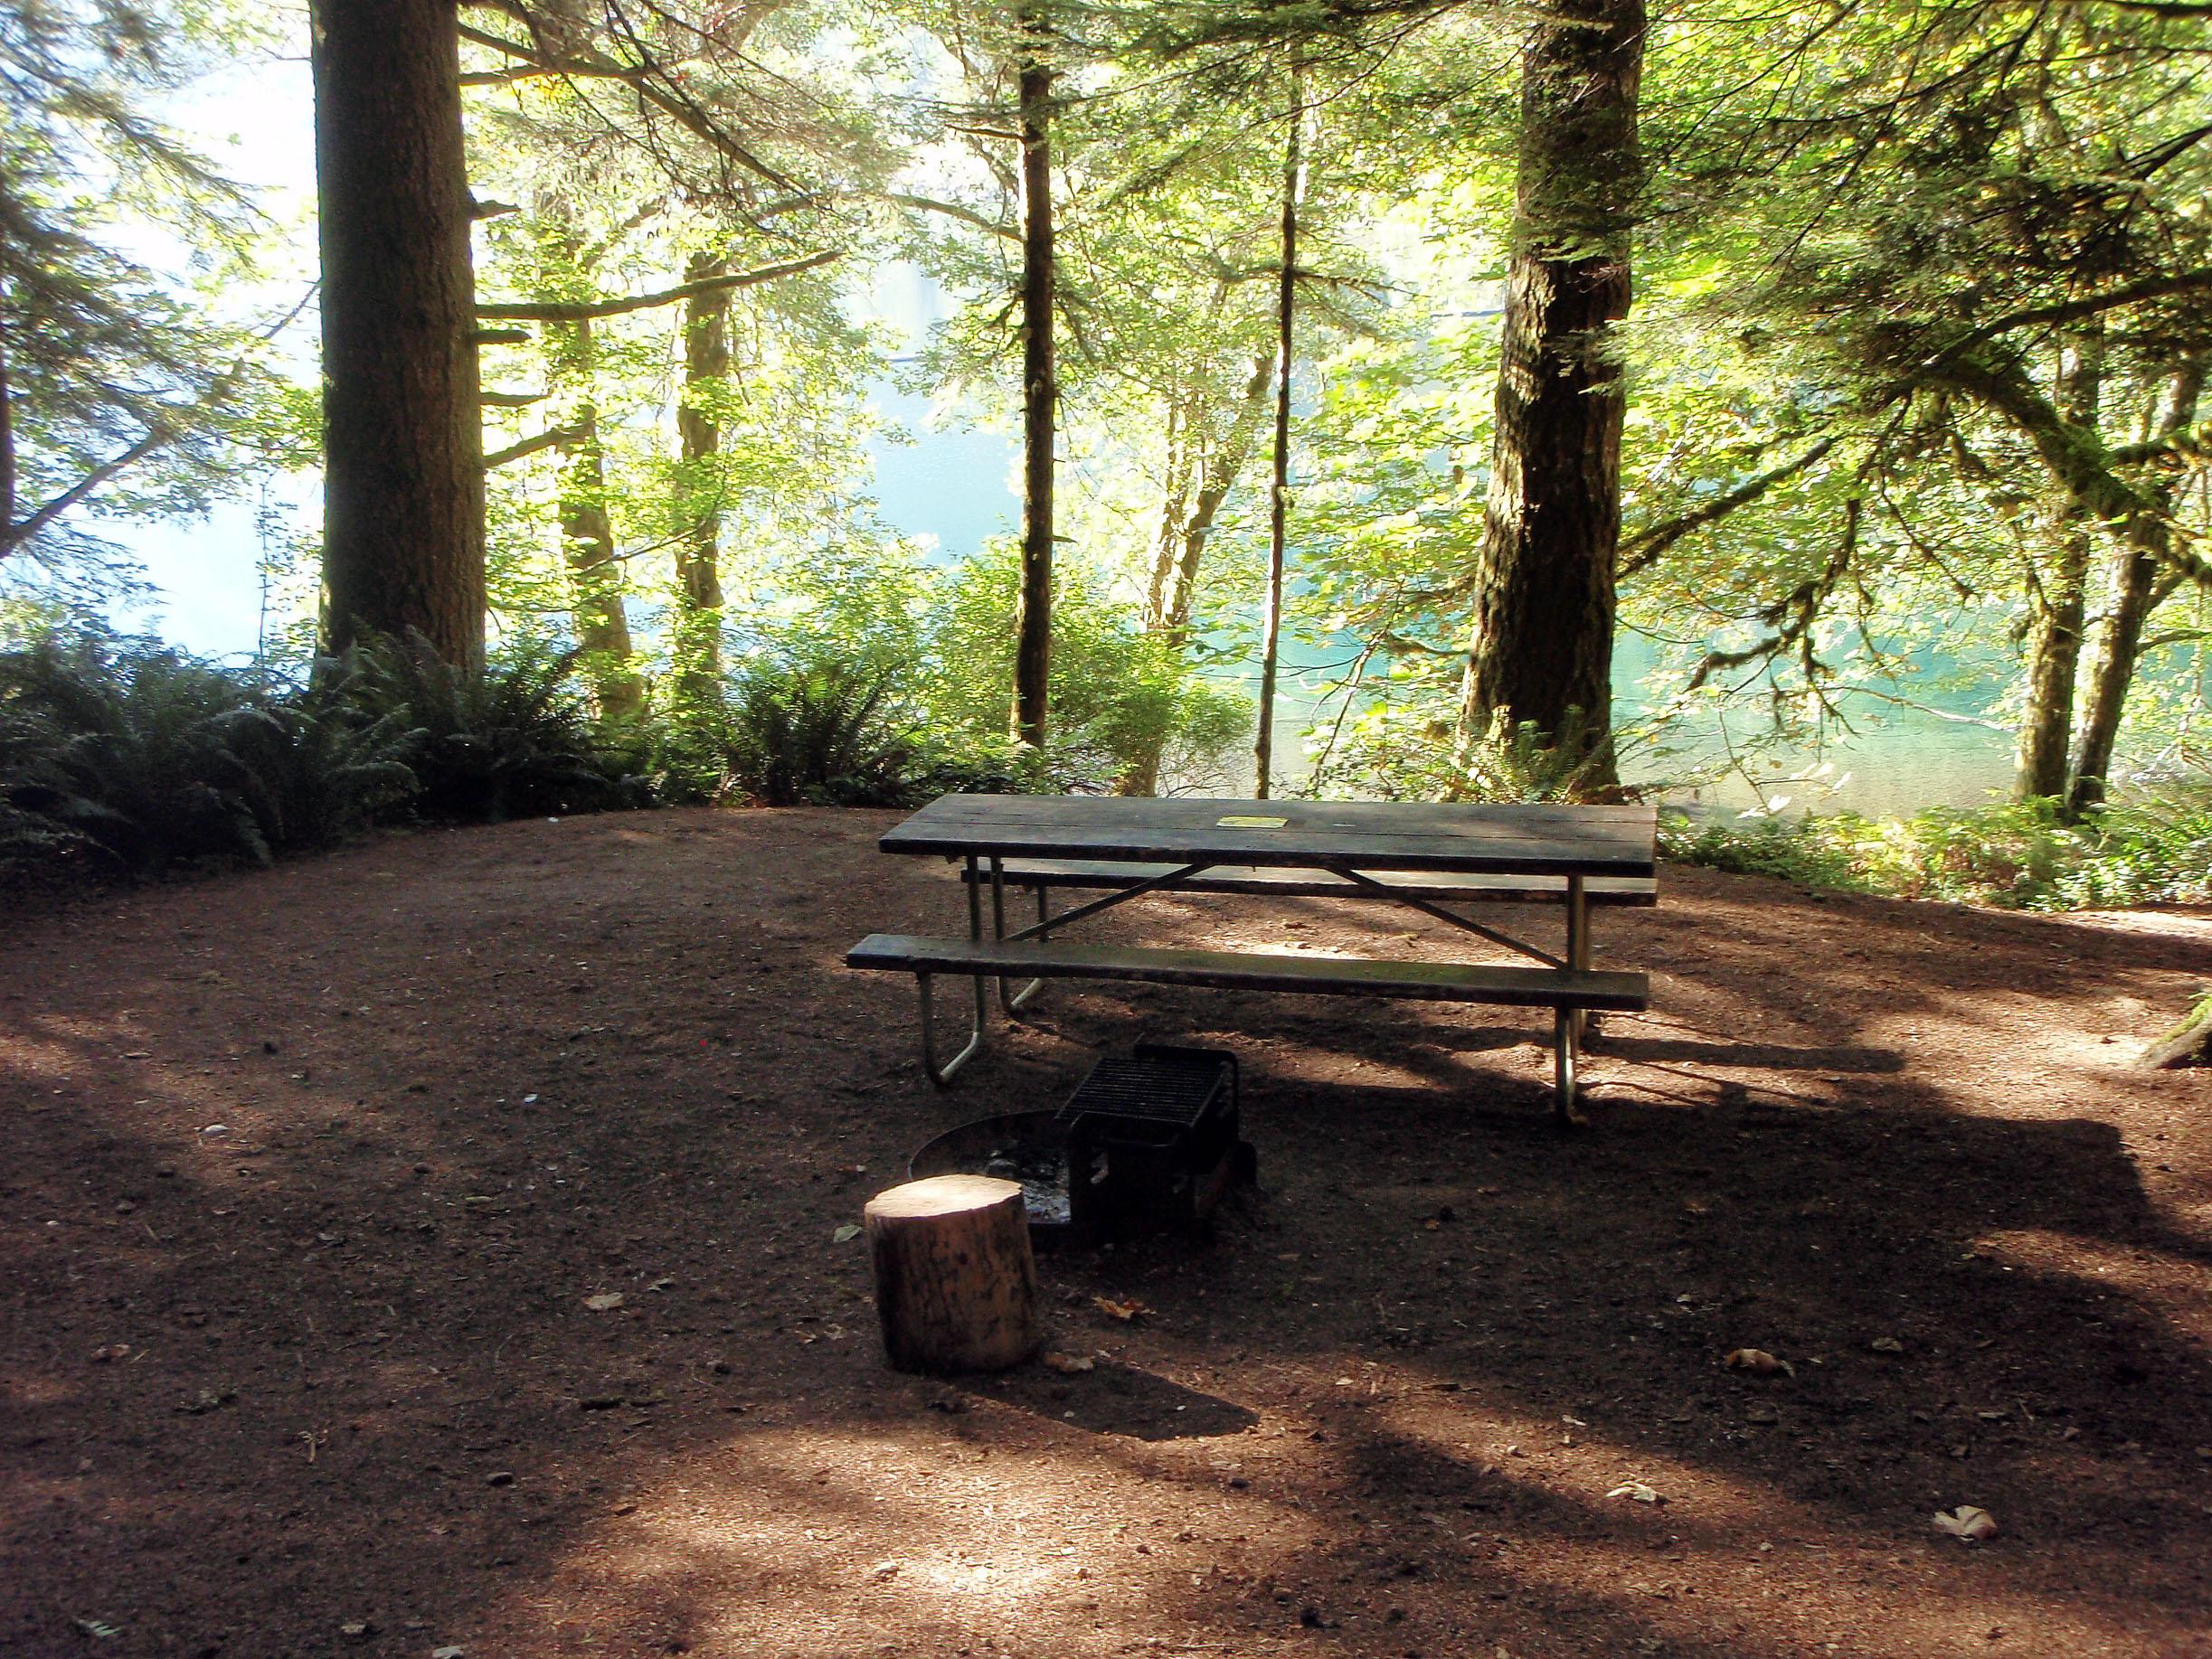 A campsite with a picnic table. Beyond the trees, glittering turquoise water.